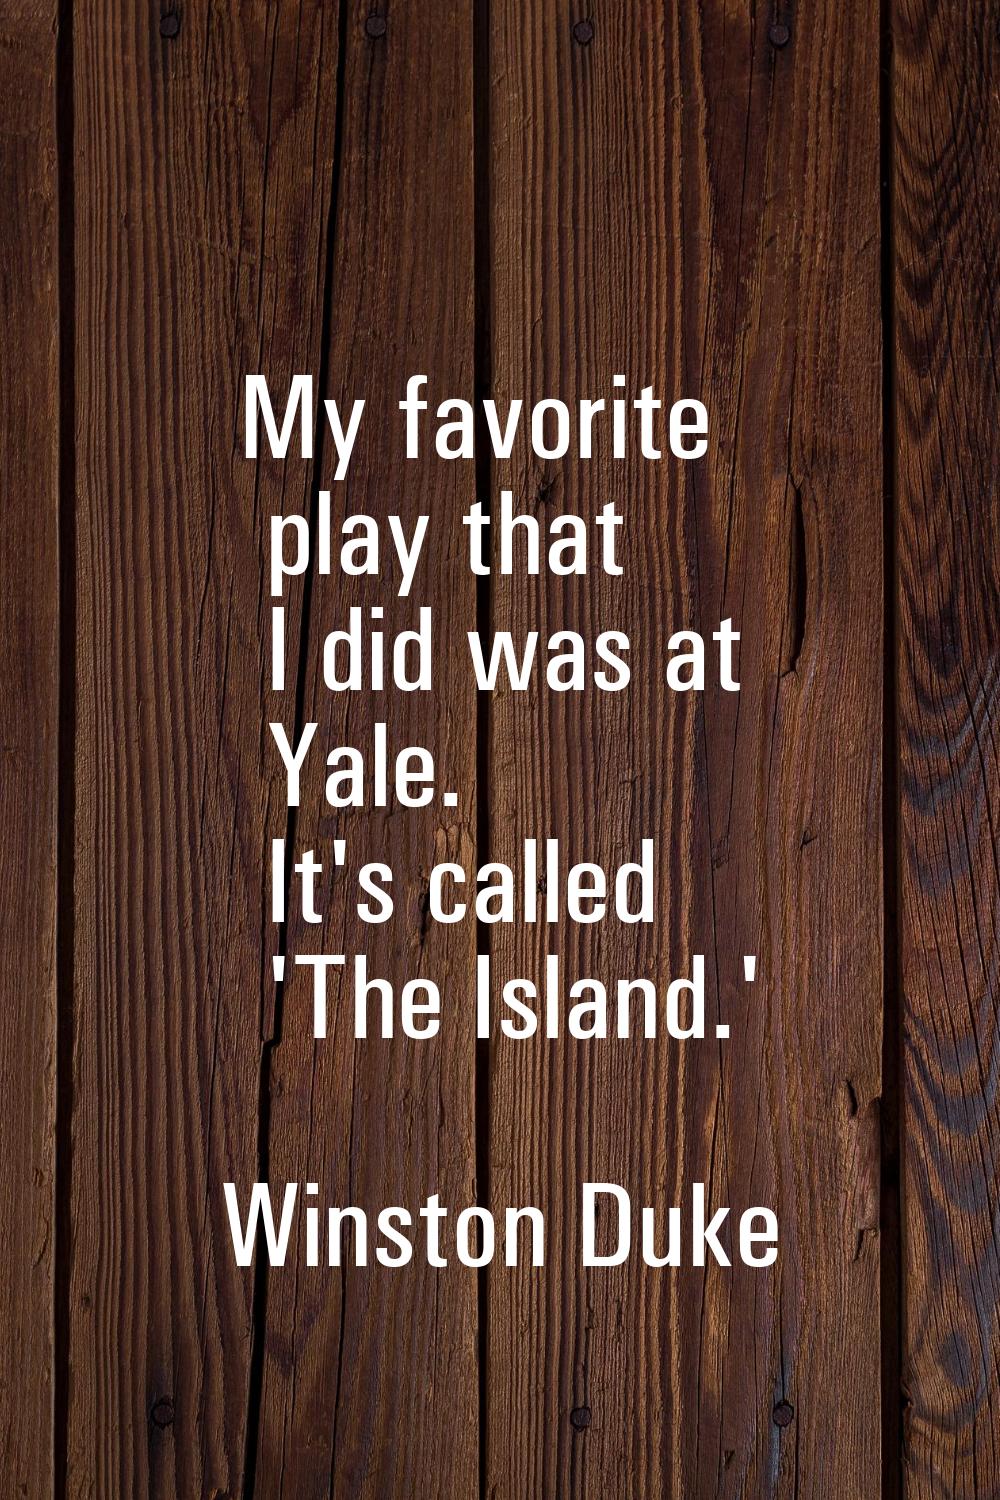 My favorite play that I did was at Yale. It's called 'The Island.'